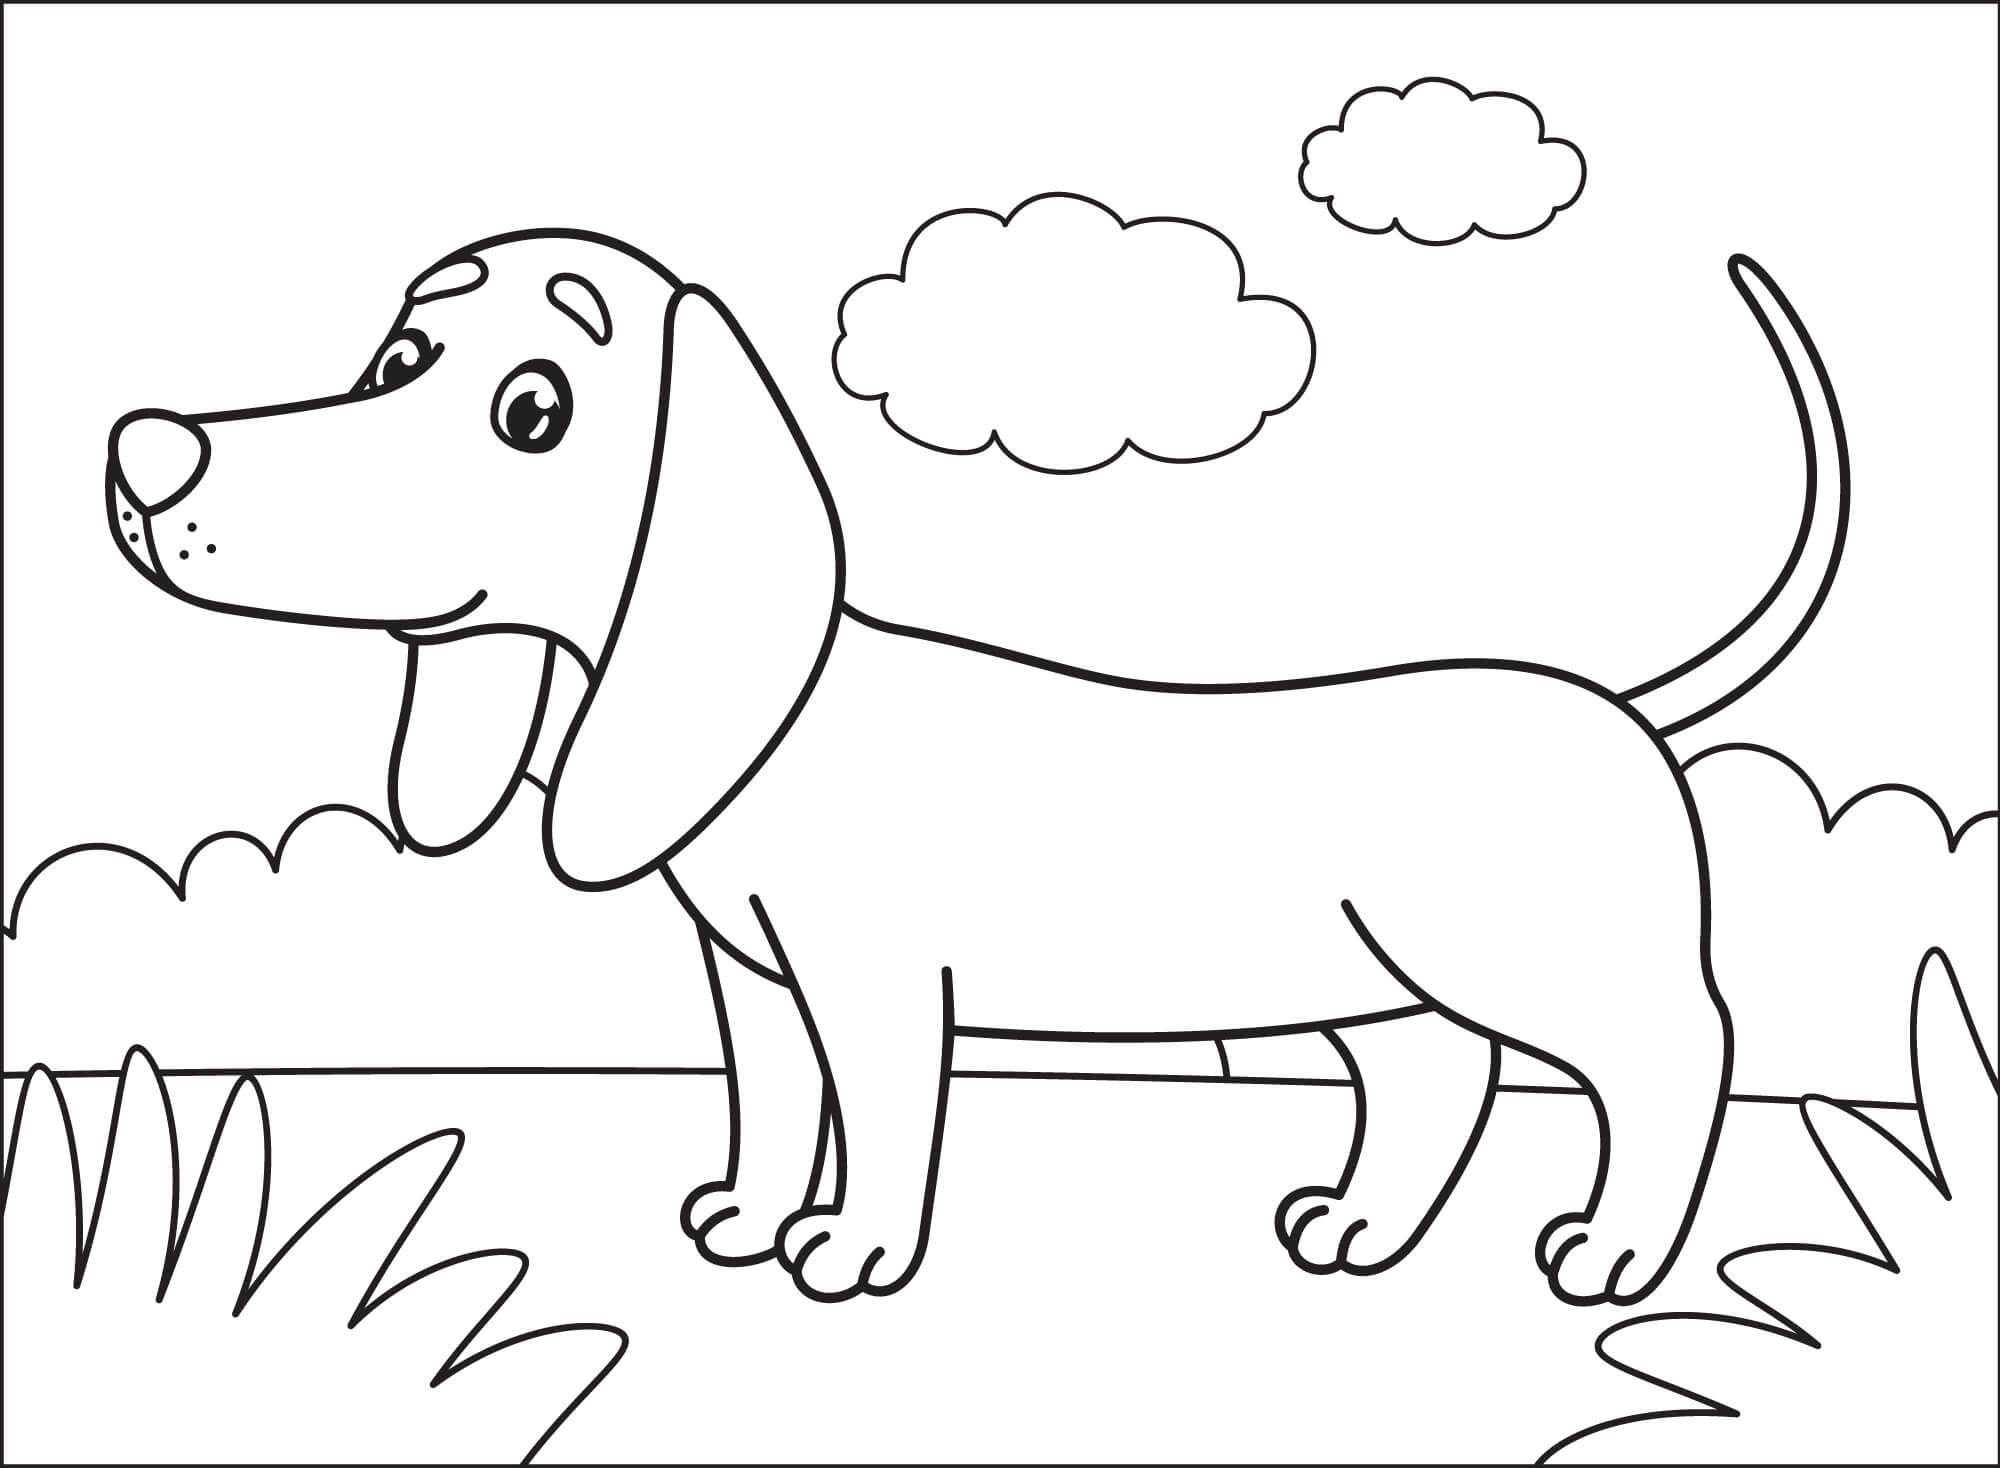 Dog Coloring Pages - Coloring Pages For Kids And Adults